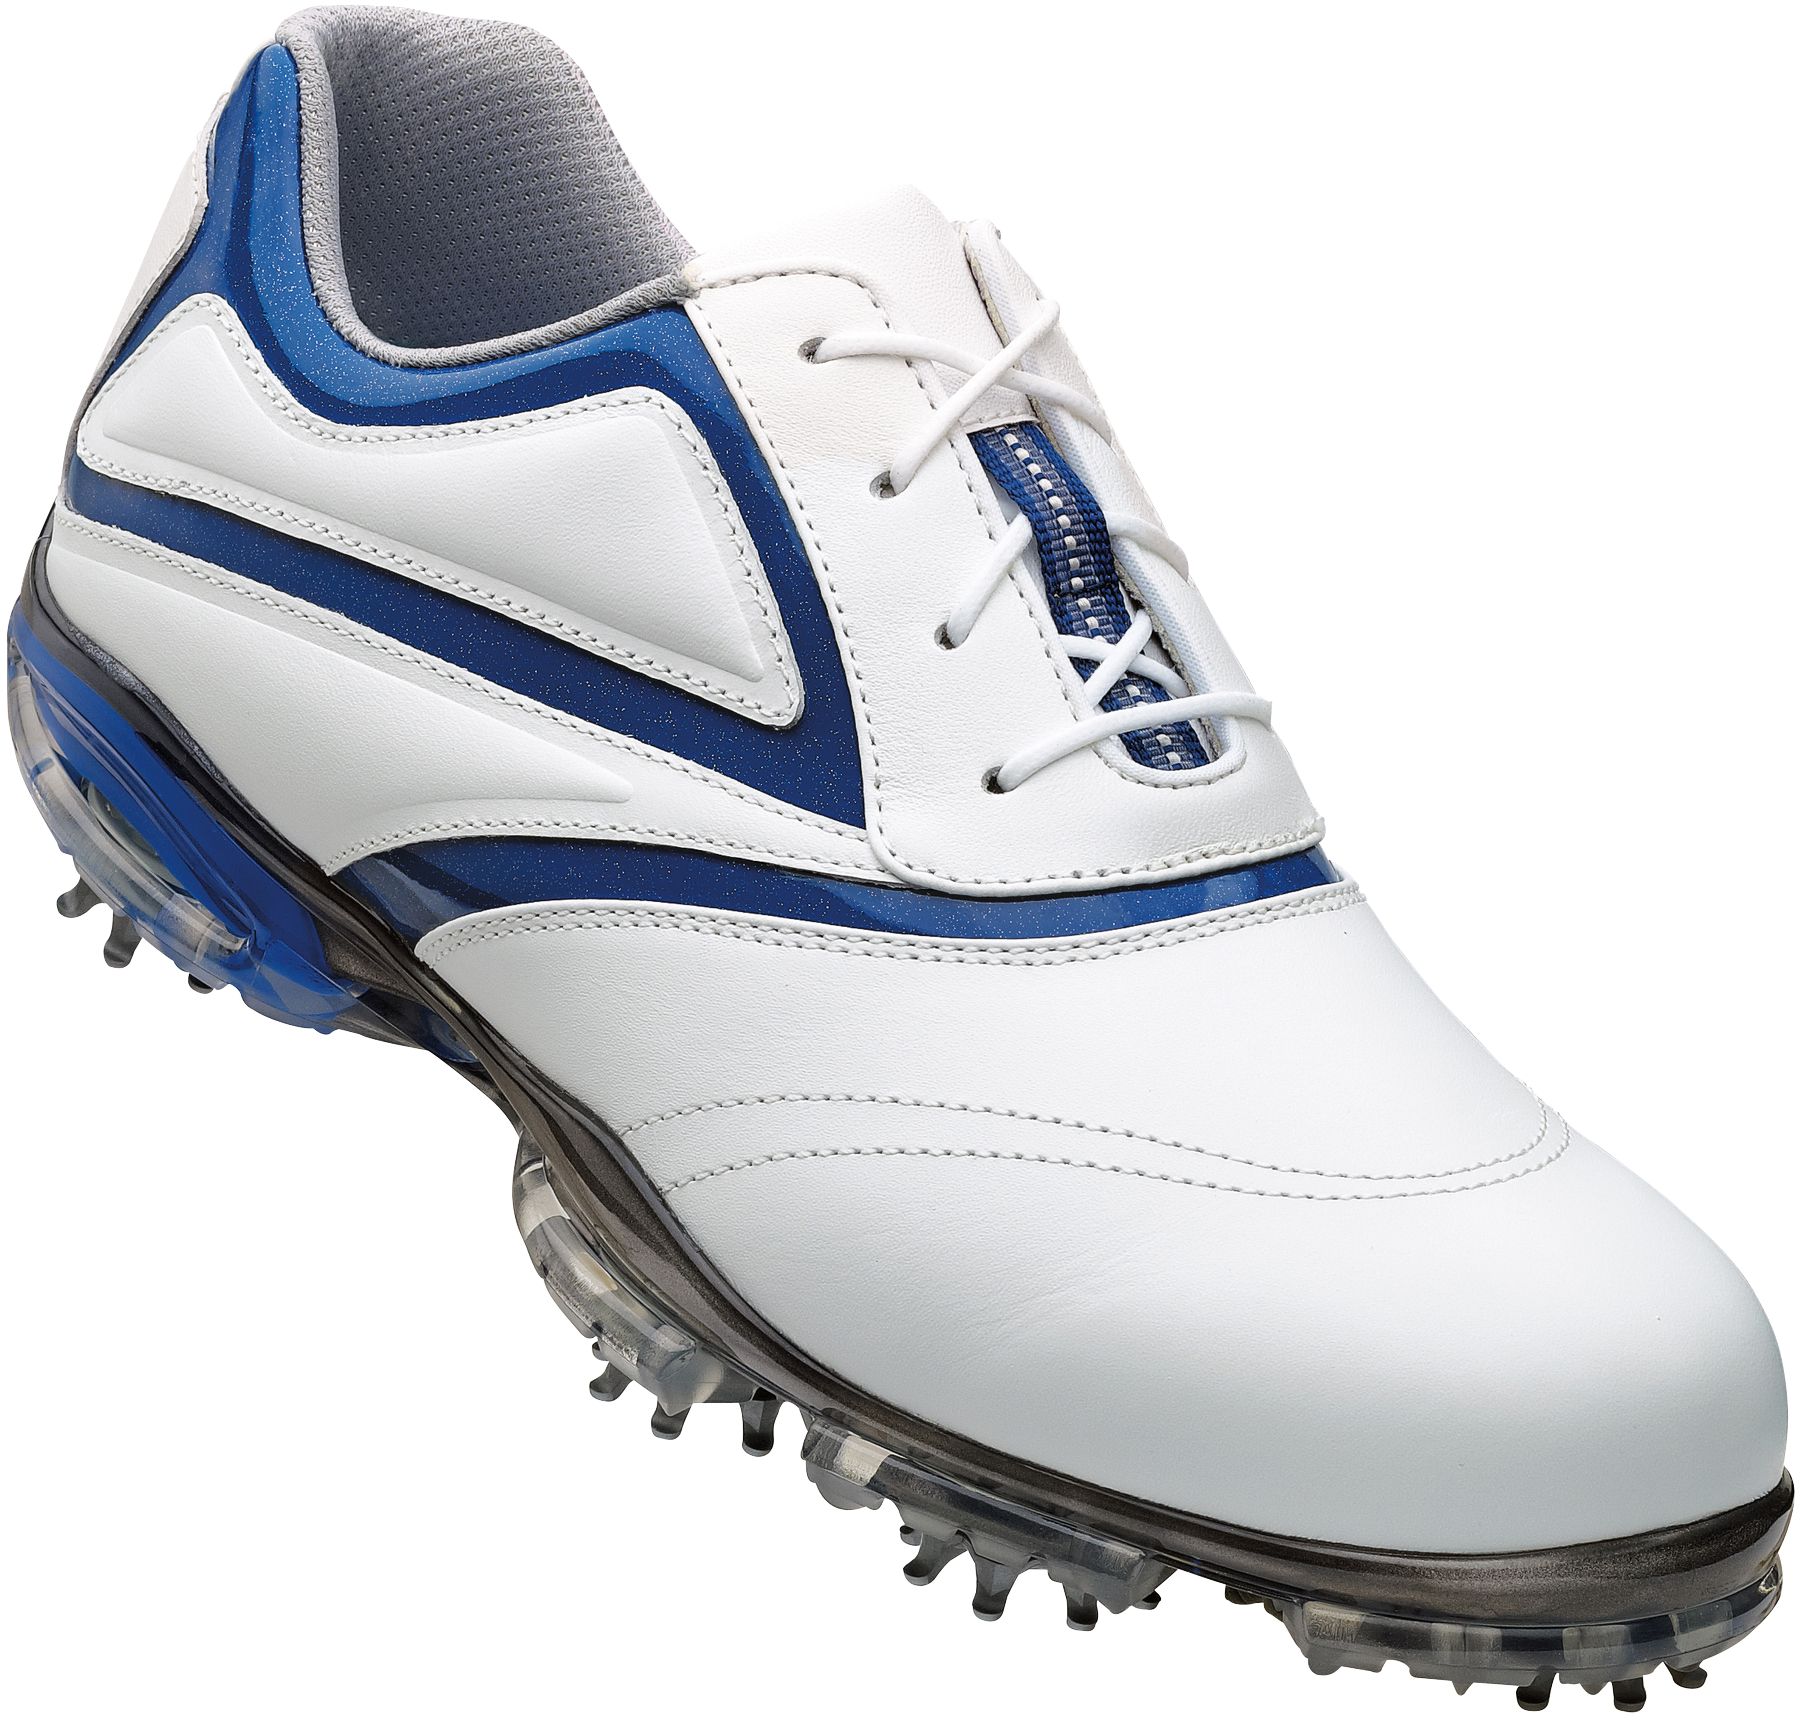 Lady Golf Shoes on Ladies Golf Shoes   Golf   Ladies Clothing